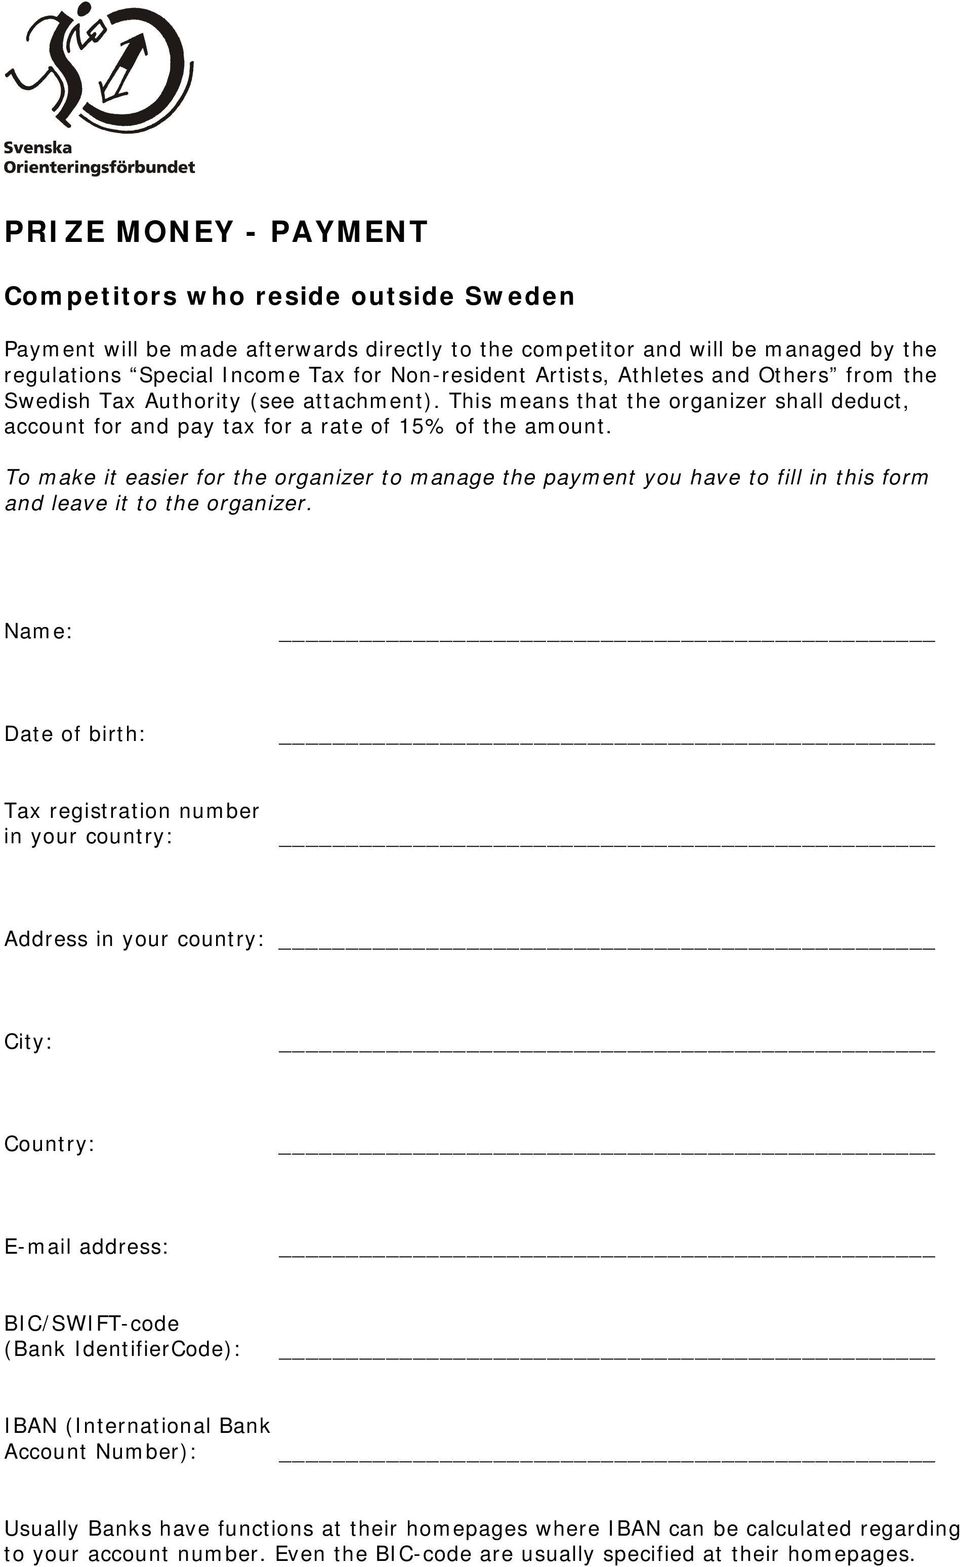 To make it easier for the organizer to manage the payment you have to fill in this form and leave it to the organizer.